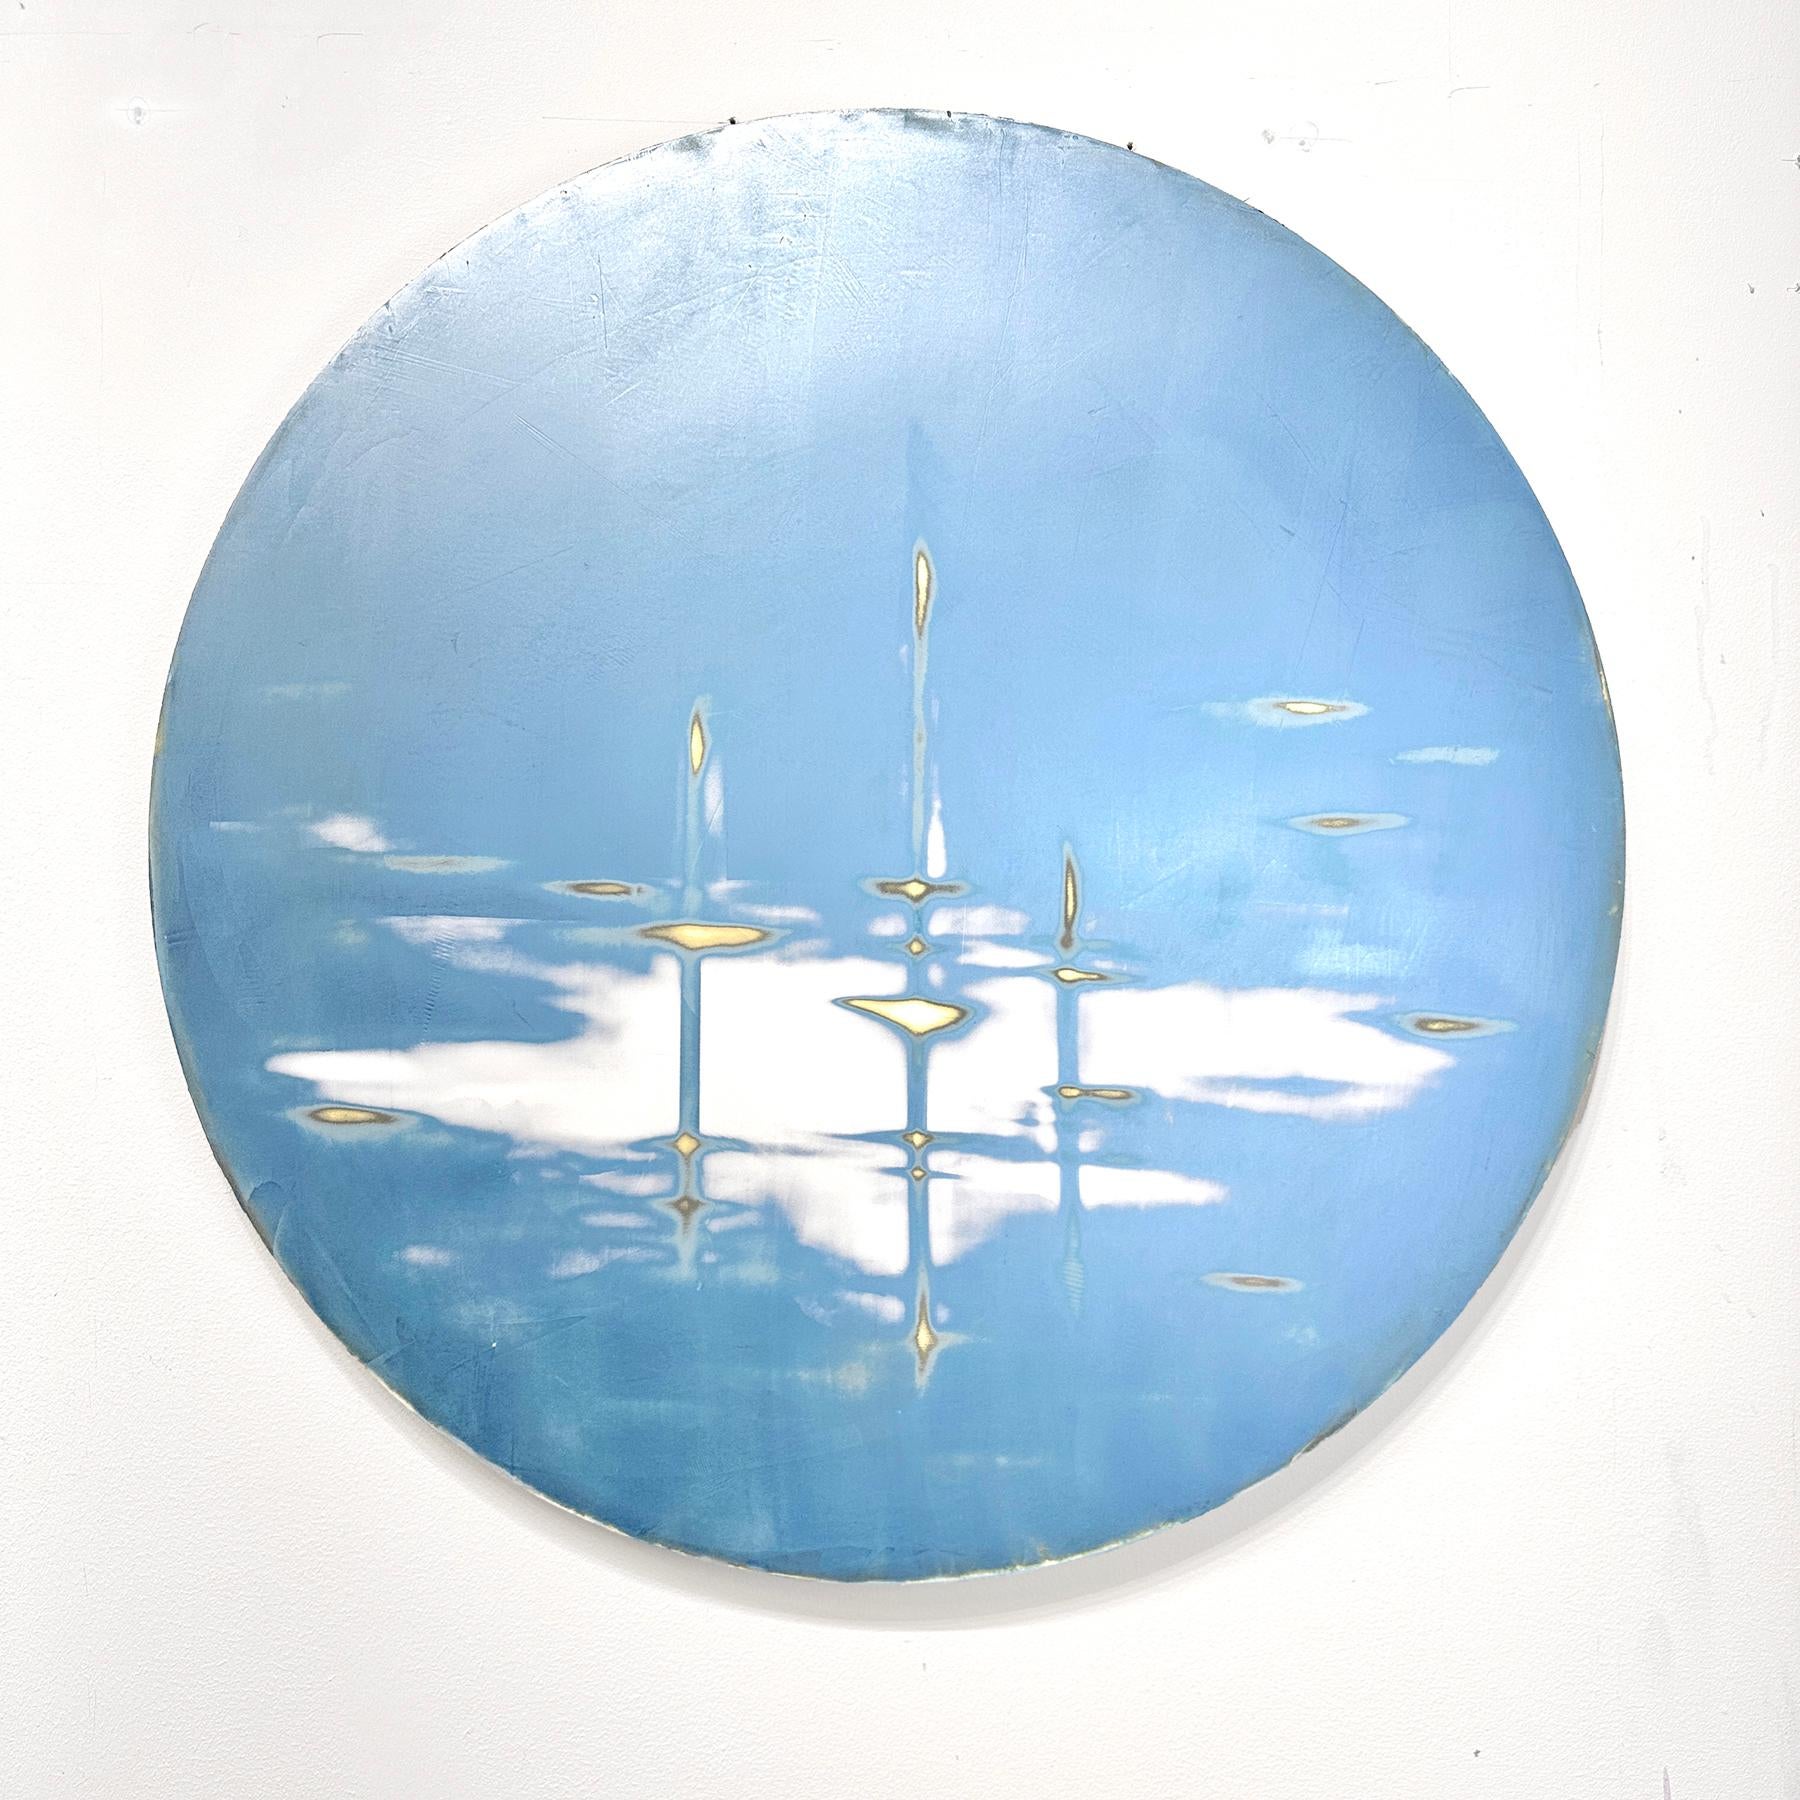 AUDRA WEASER
"Ocean Flight IV"
Acrylic, Metallic Pigments, Plaster Paint on Panel
30 x 30 in. 
___________________

Utilizing a minimalist color palette, Weaser’s process-based paintings are excavations of memories shaped by time. Working